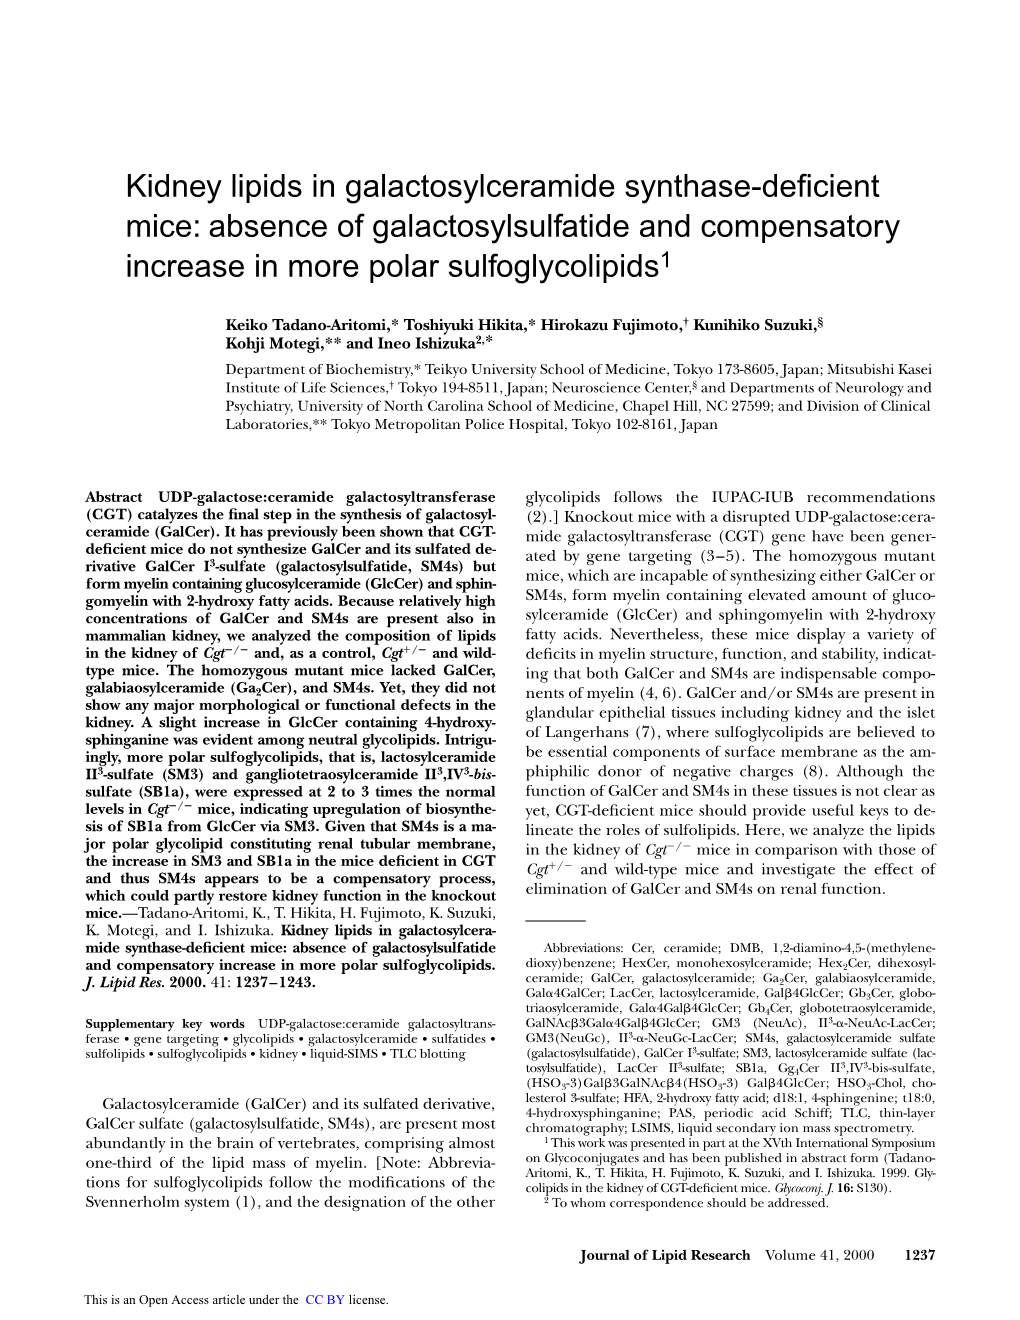 Kidney Lipids in Galactosylceramide Synthase-Deficient Mice